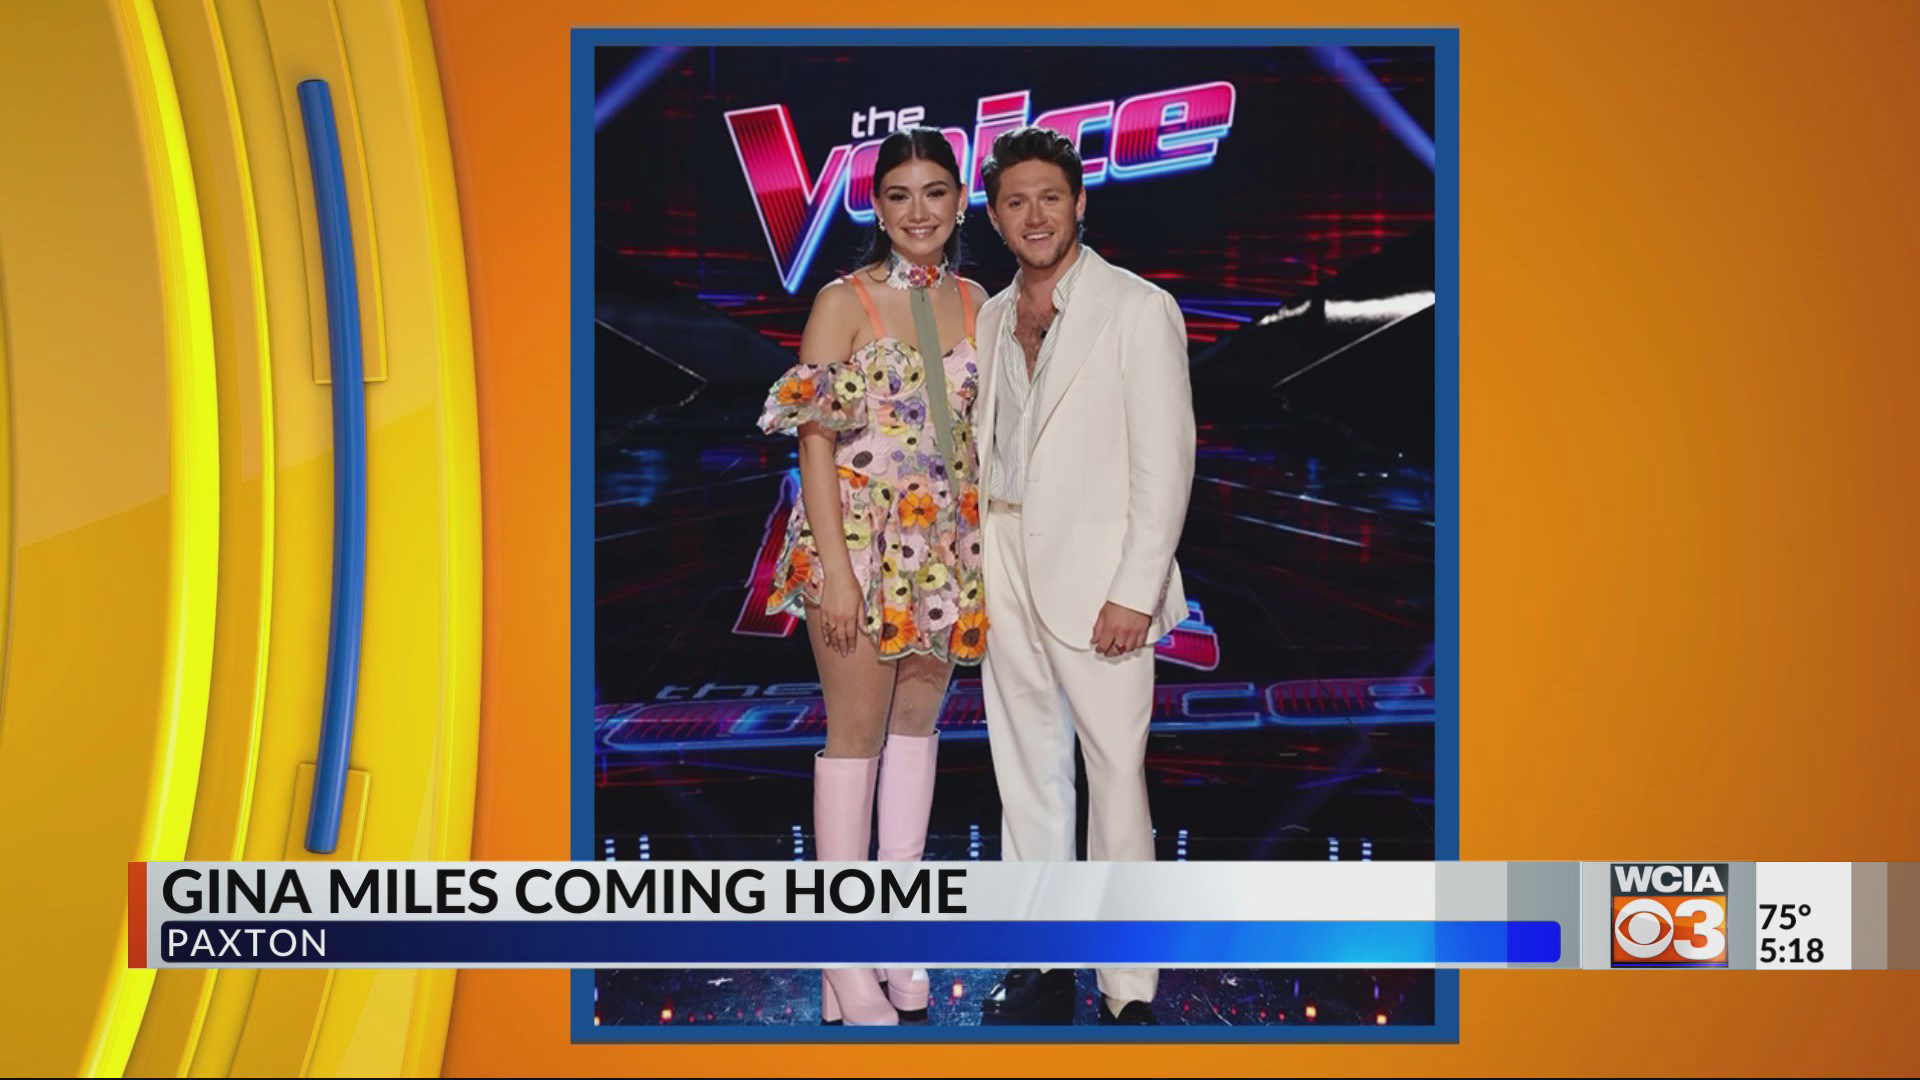 Paxton native, "The Voice" winner Gina Miles returning home for pair of